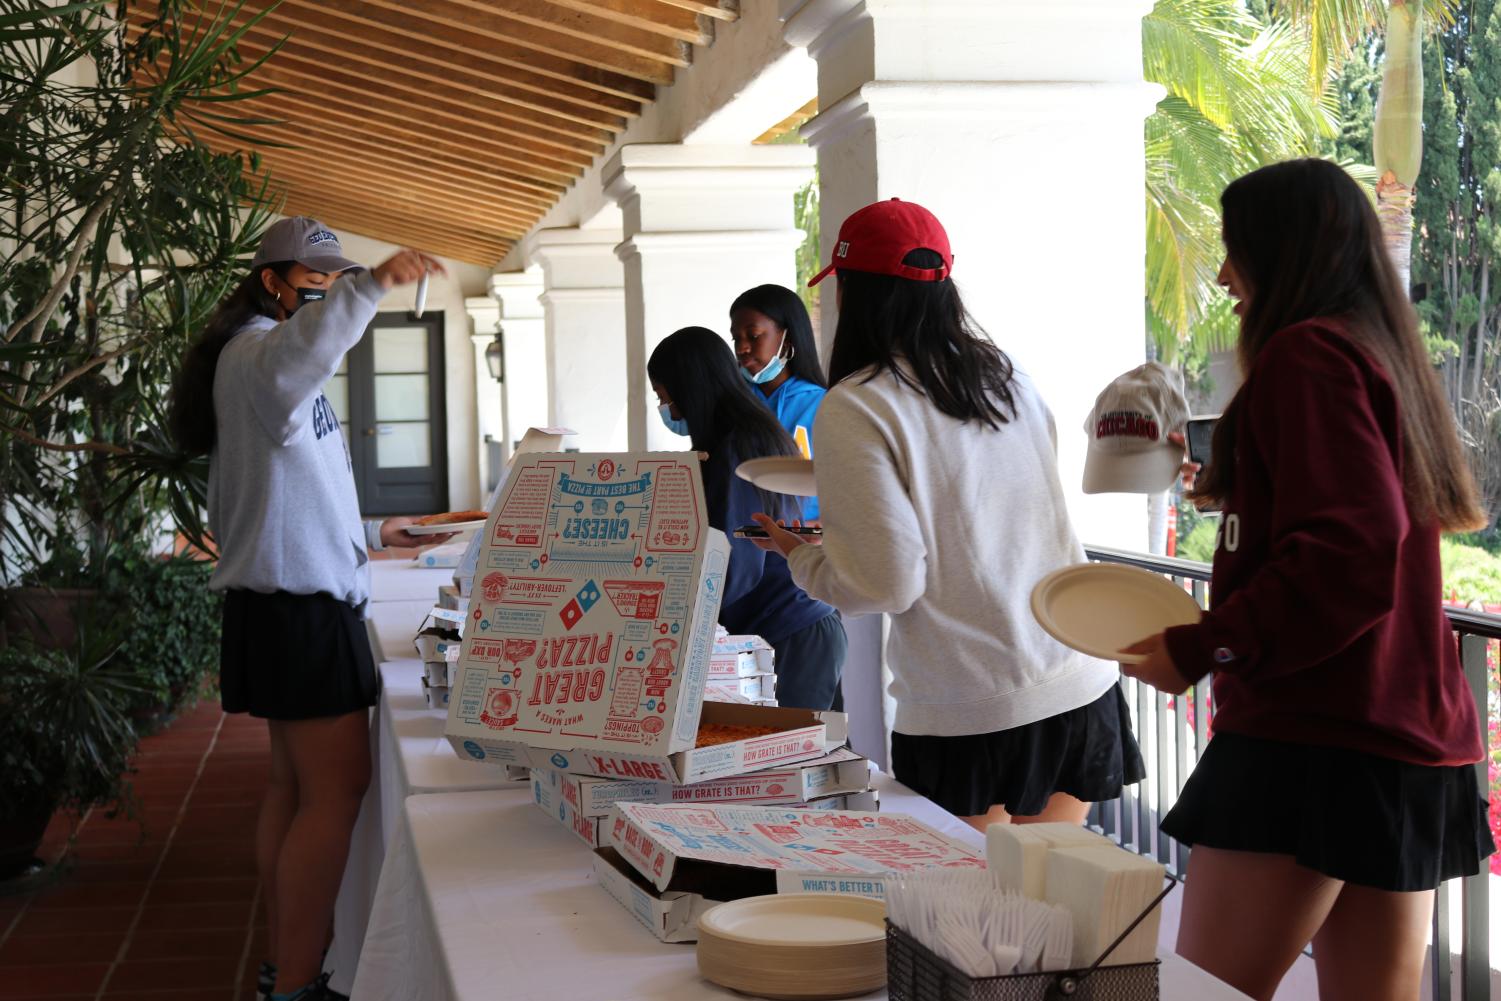 Pennants%2C+pizza%2C+photos%3A+Seniors+celebrate+National+College+Decision+Day